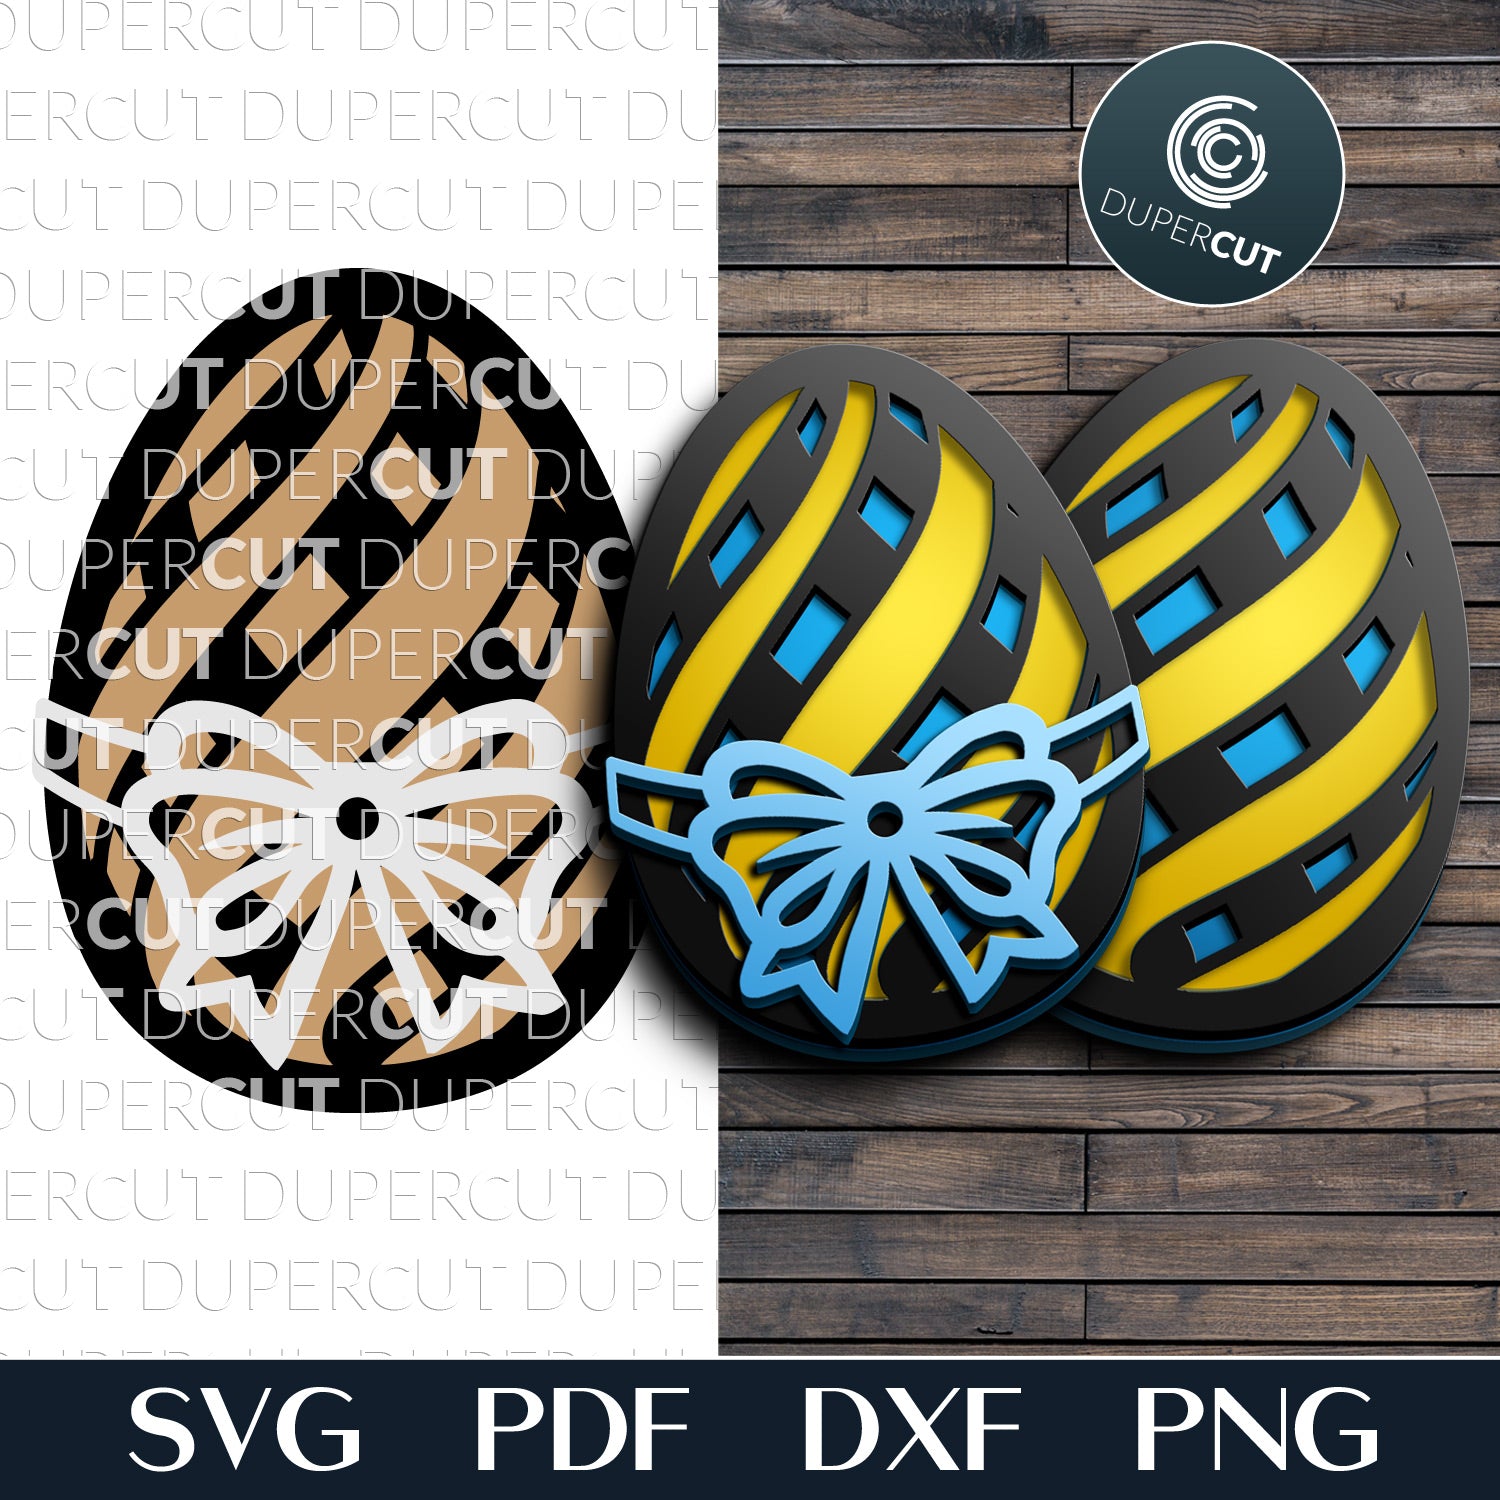 Easter egg with basket weave pattern - SVG DXF layered cutting files for Glowforge, Cricut, Silhouette Cameo, scroll saw by DuperCut.com